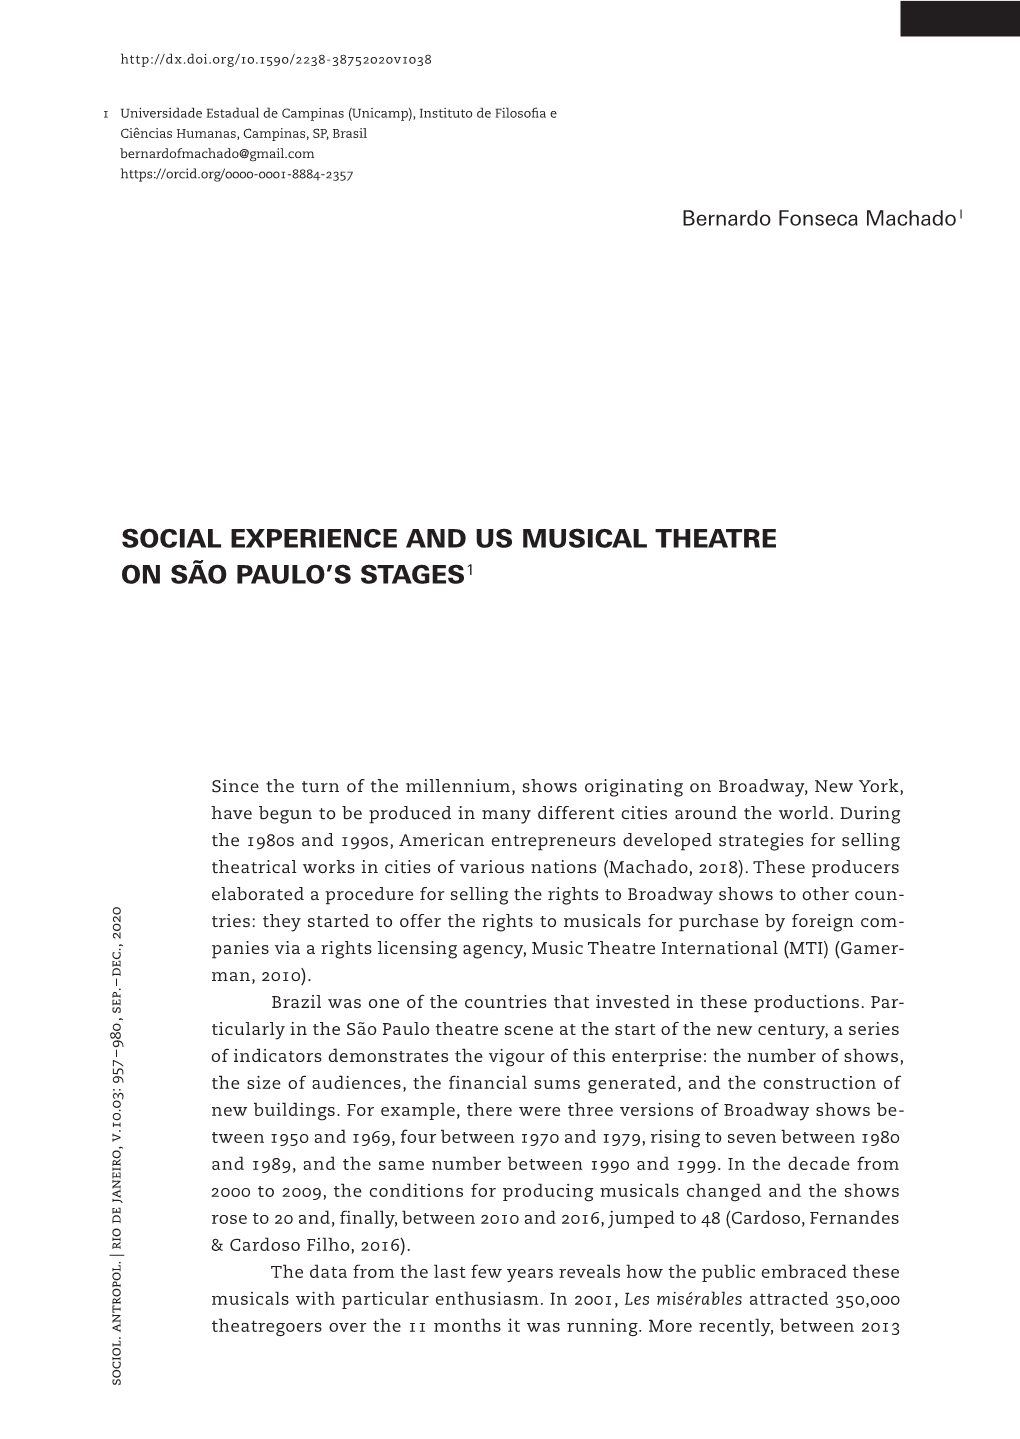 Social Experience and Us Musical Theatre on São Paulo’S Stages 1